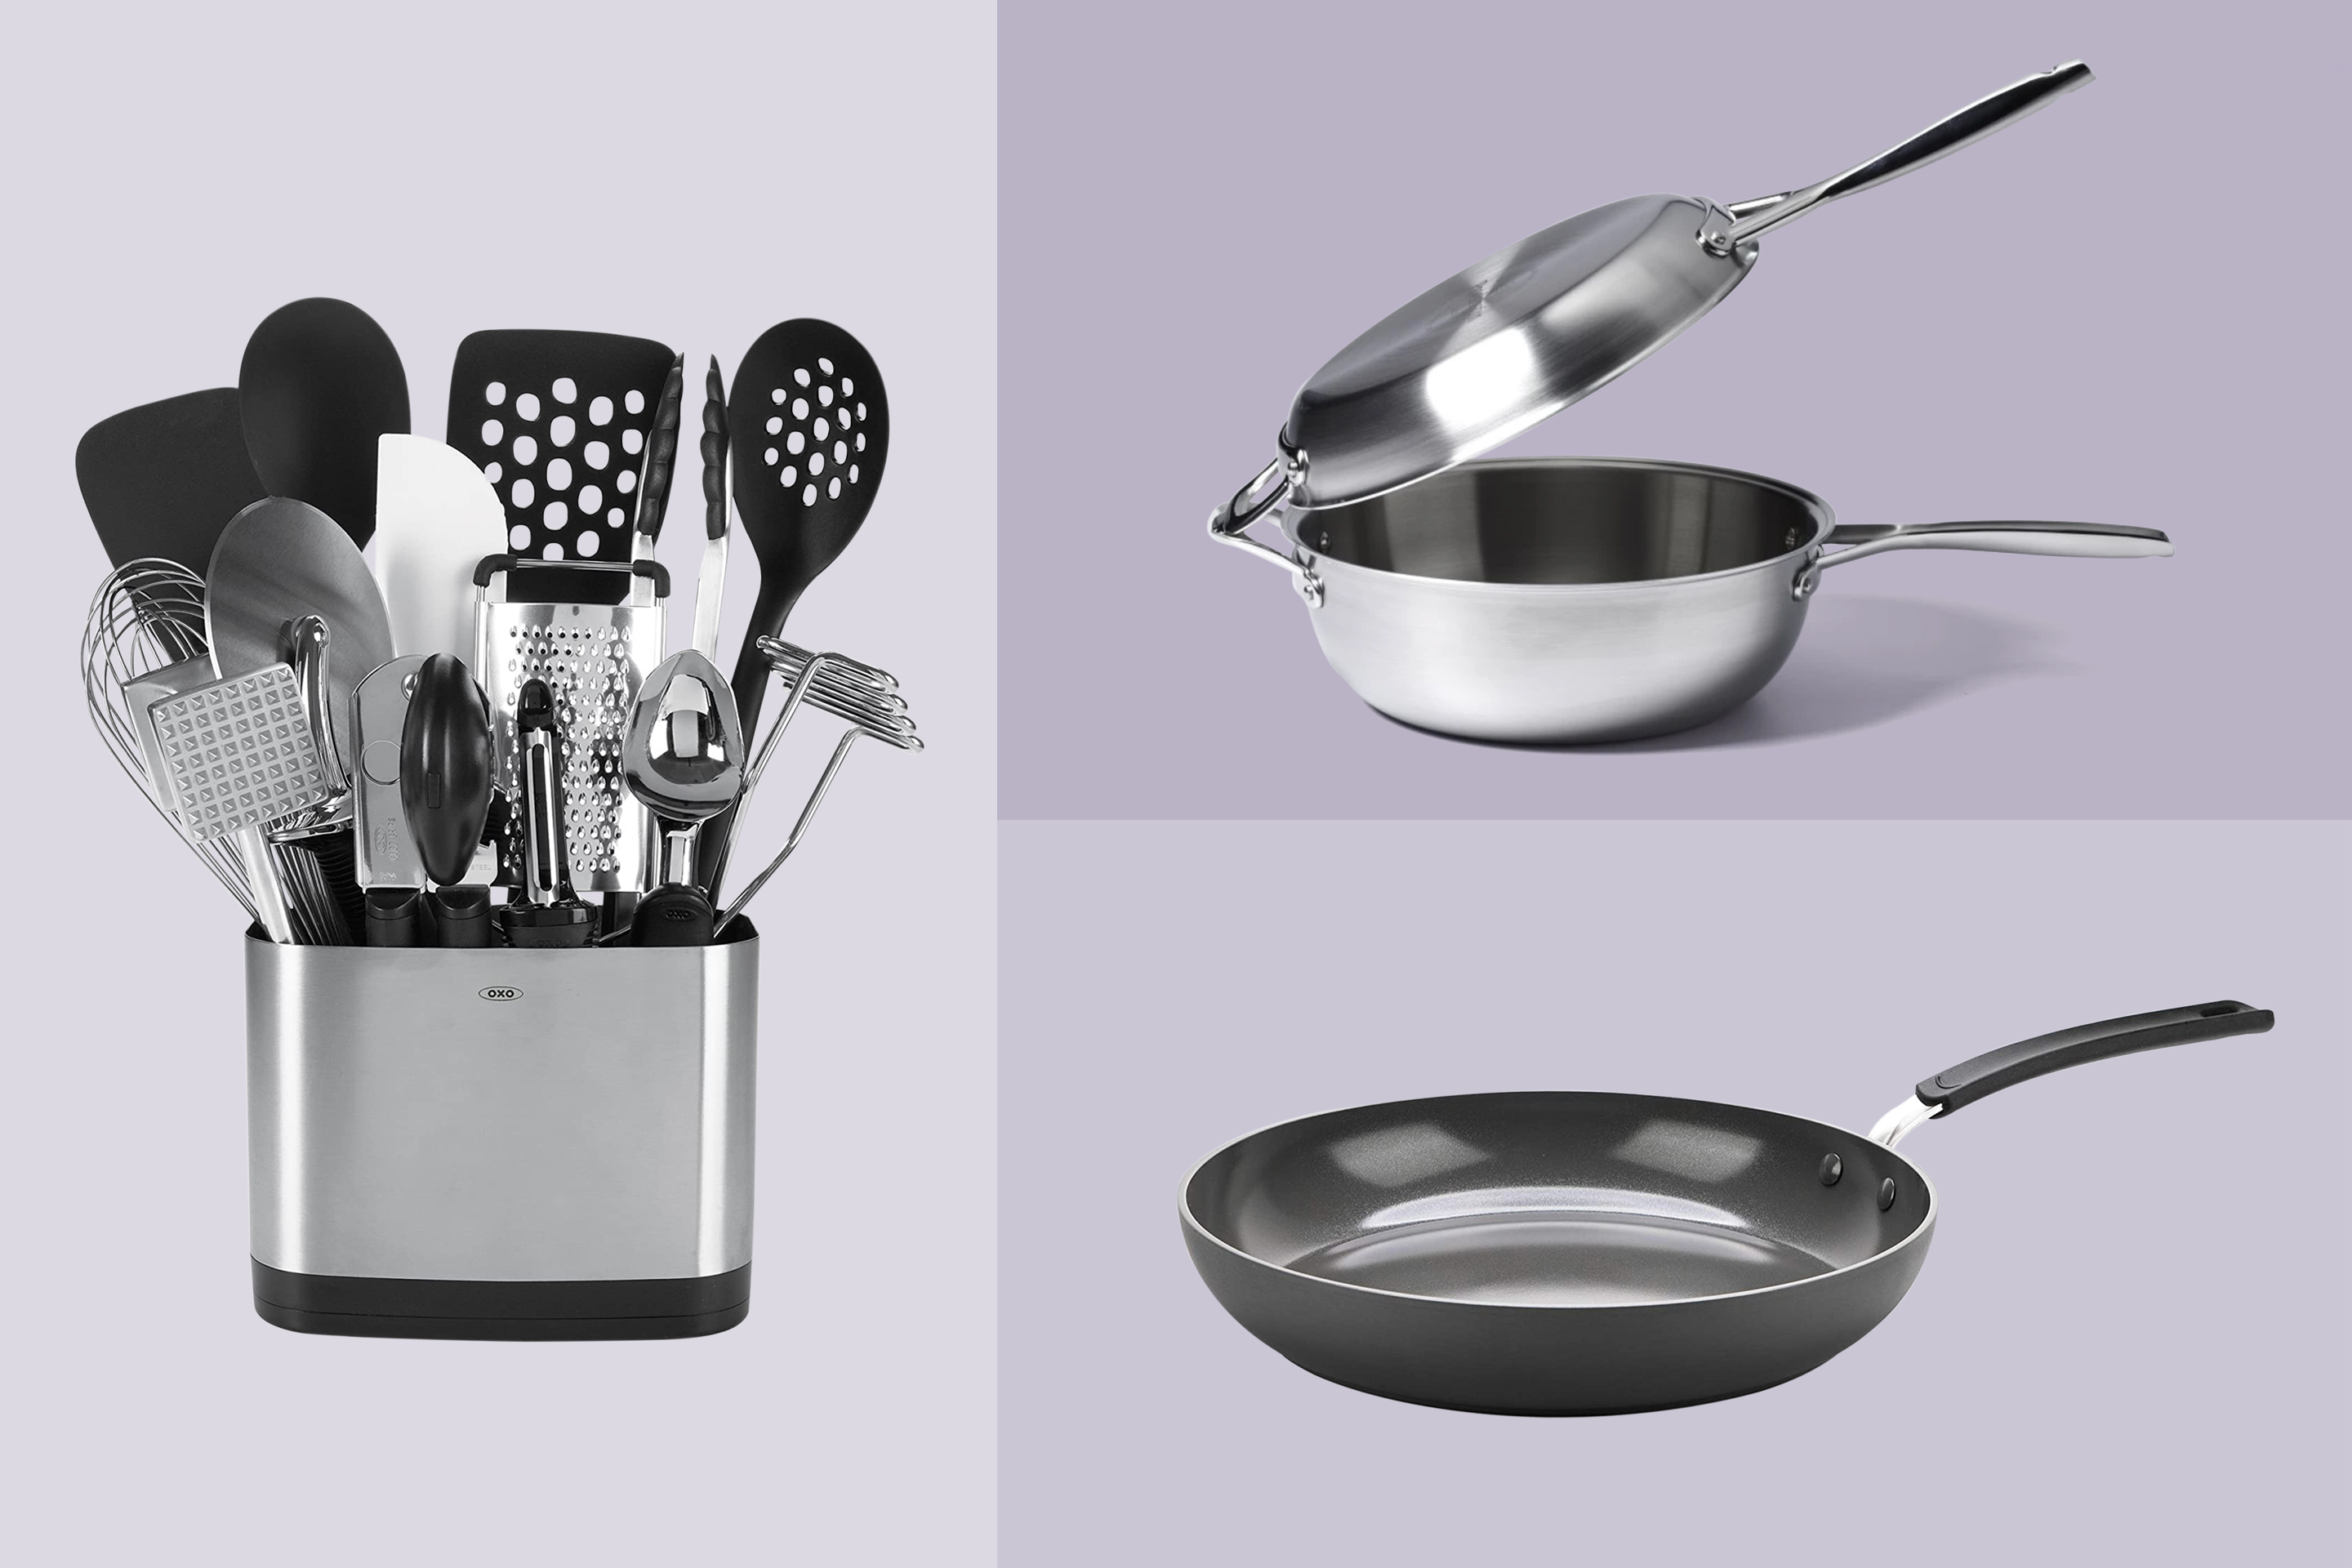 The Best Kitchen Gear for College Students